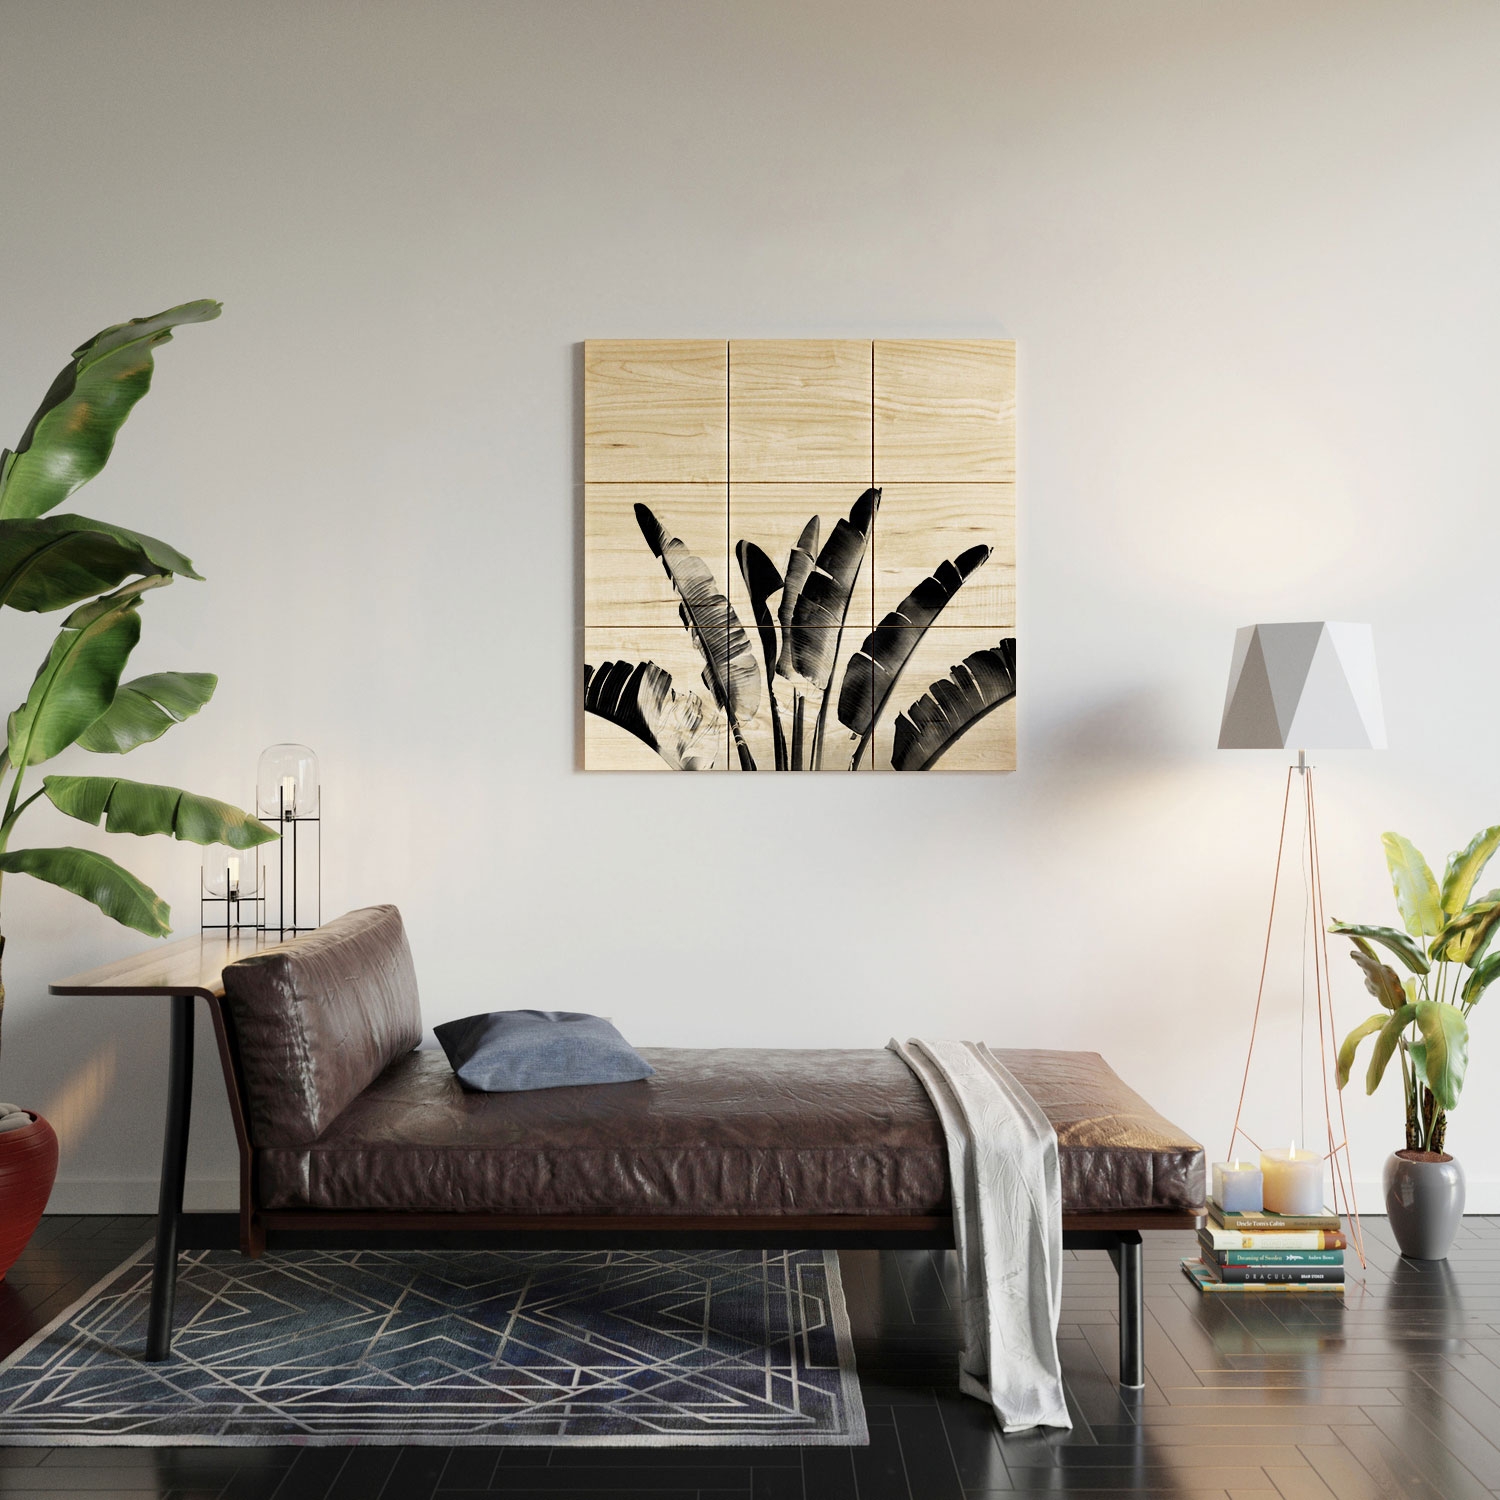 Traveler Palm Bw by Gale Switzer - Wood Wall Mural5' x 5' (Nine 20" wood Squares) - Image 3